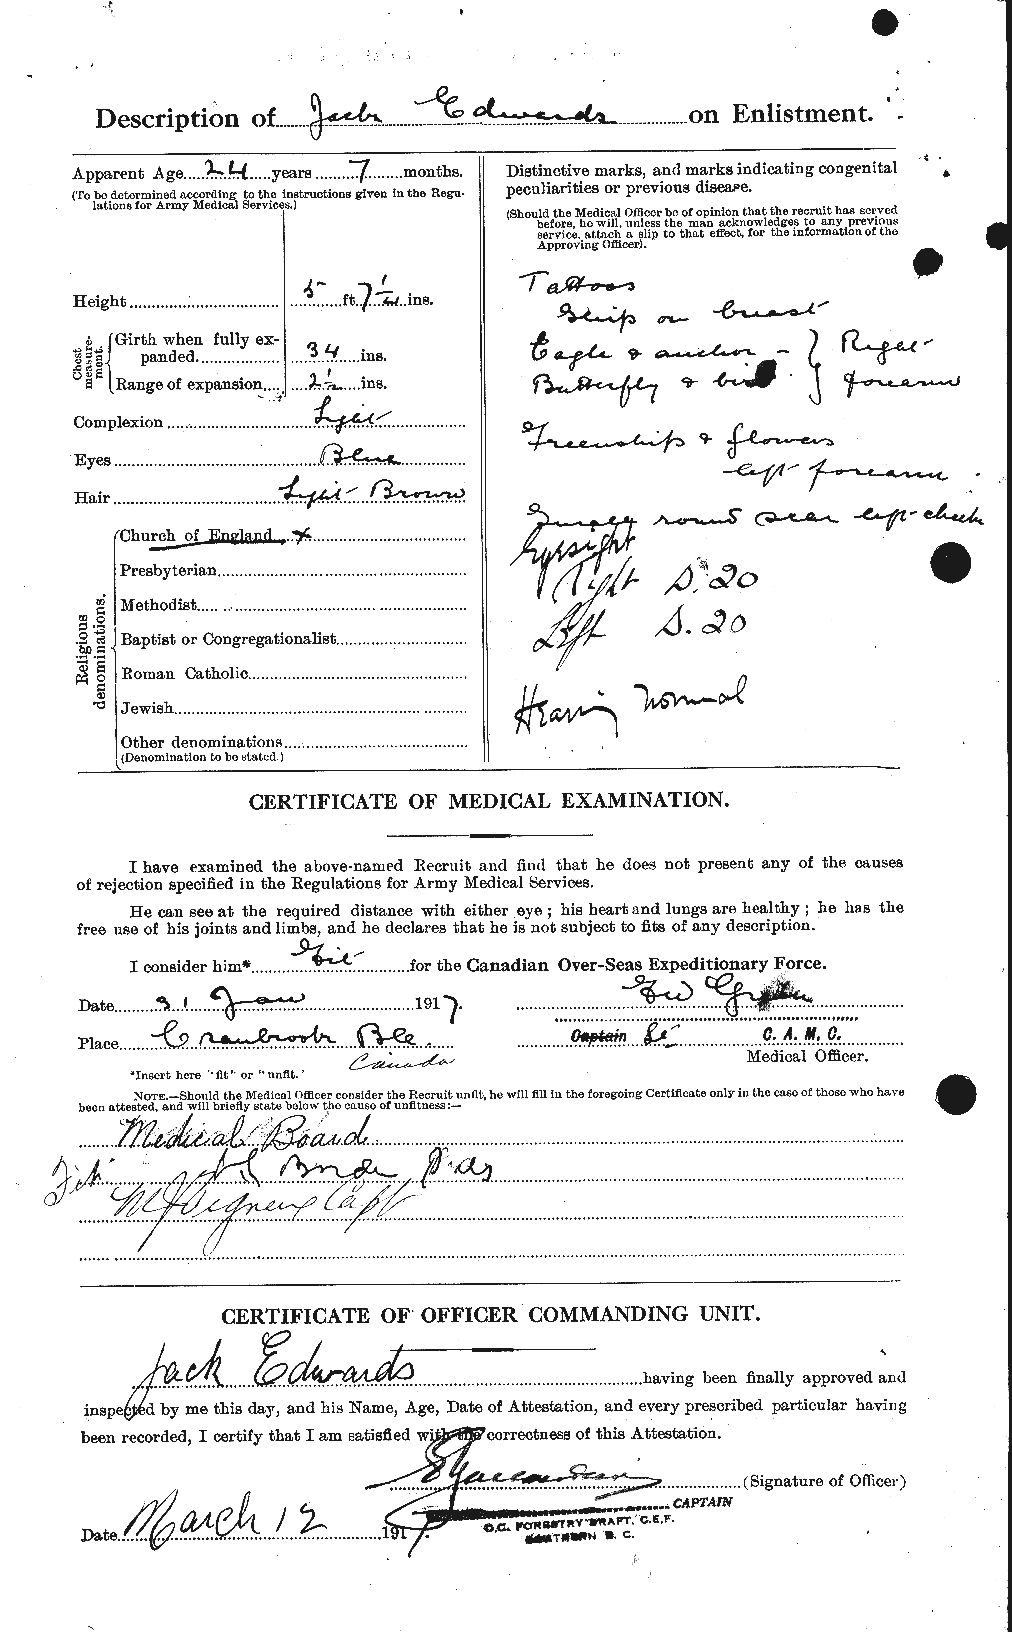 Personnel Records of the First World War - CEF 309799b